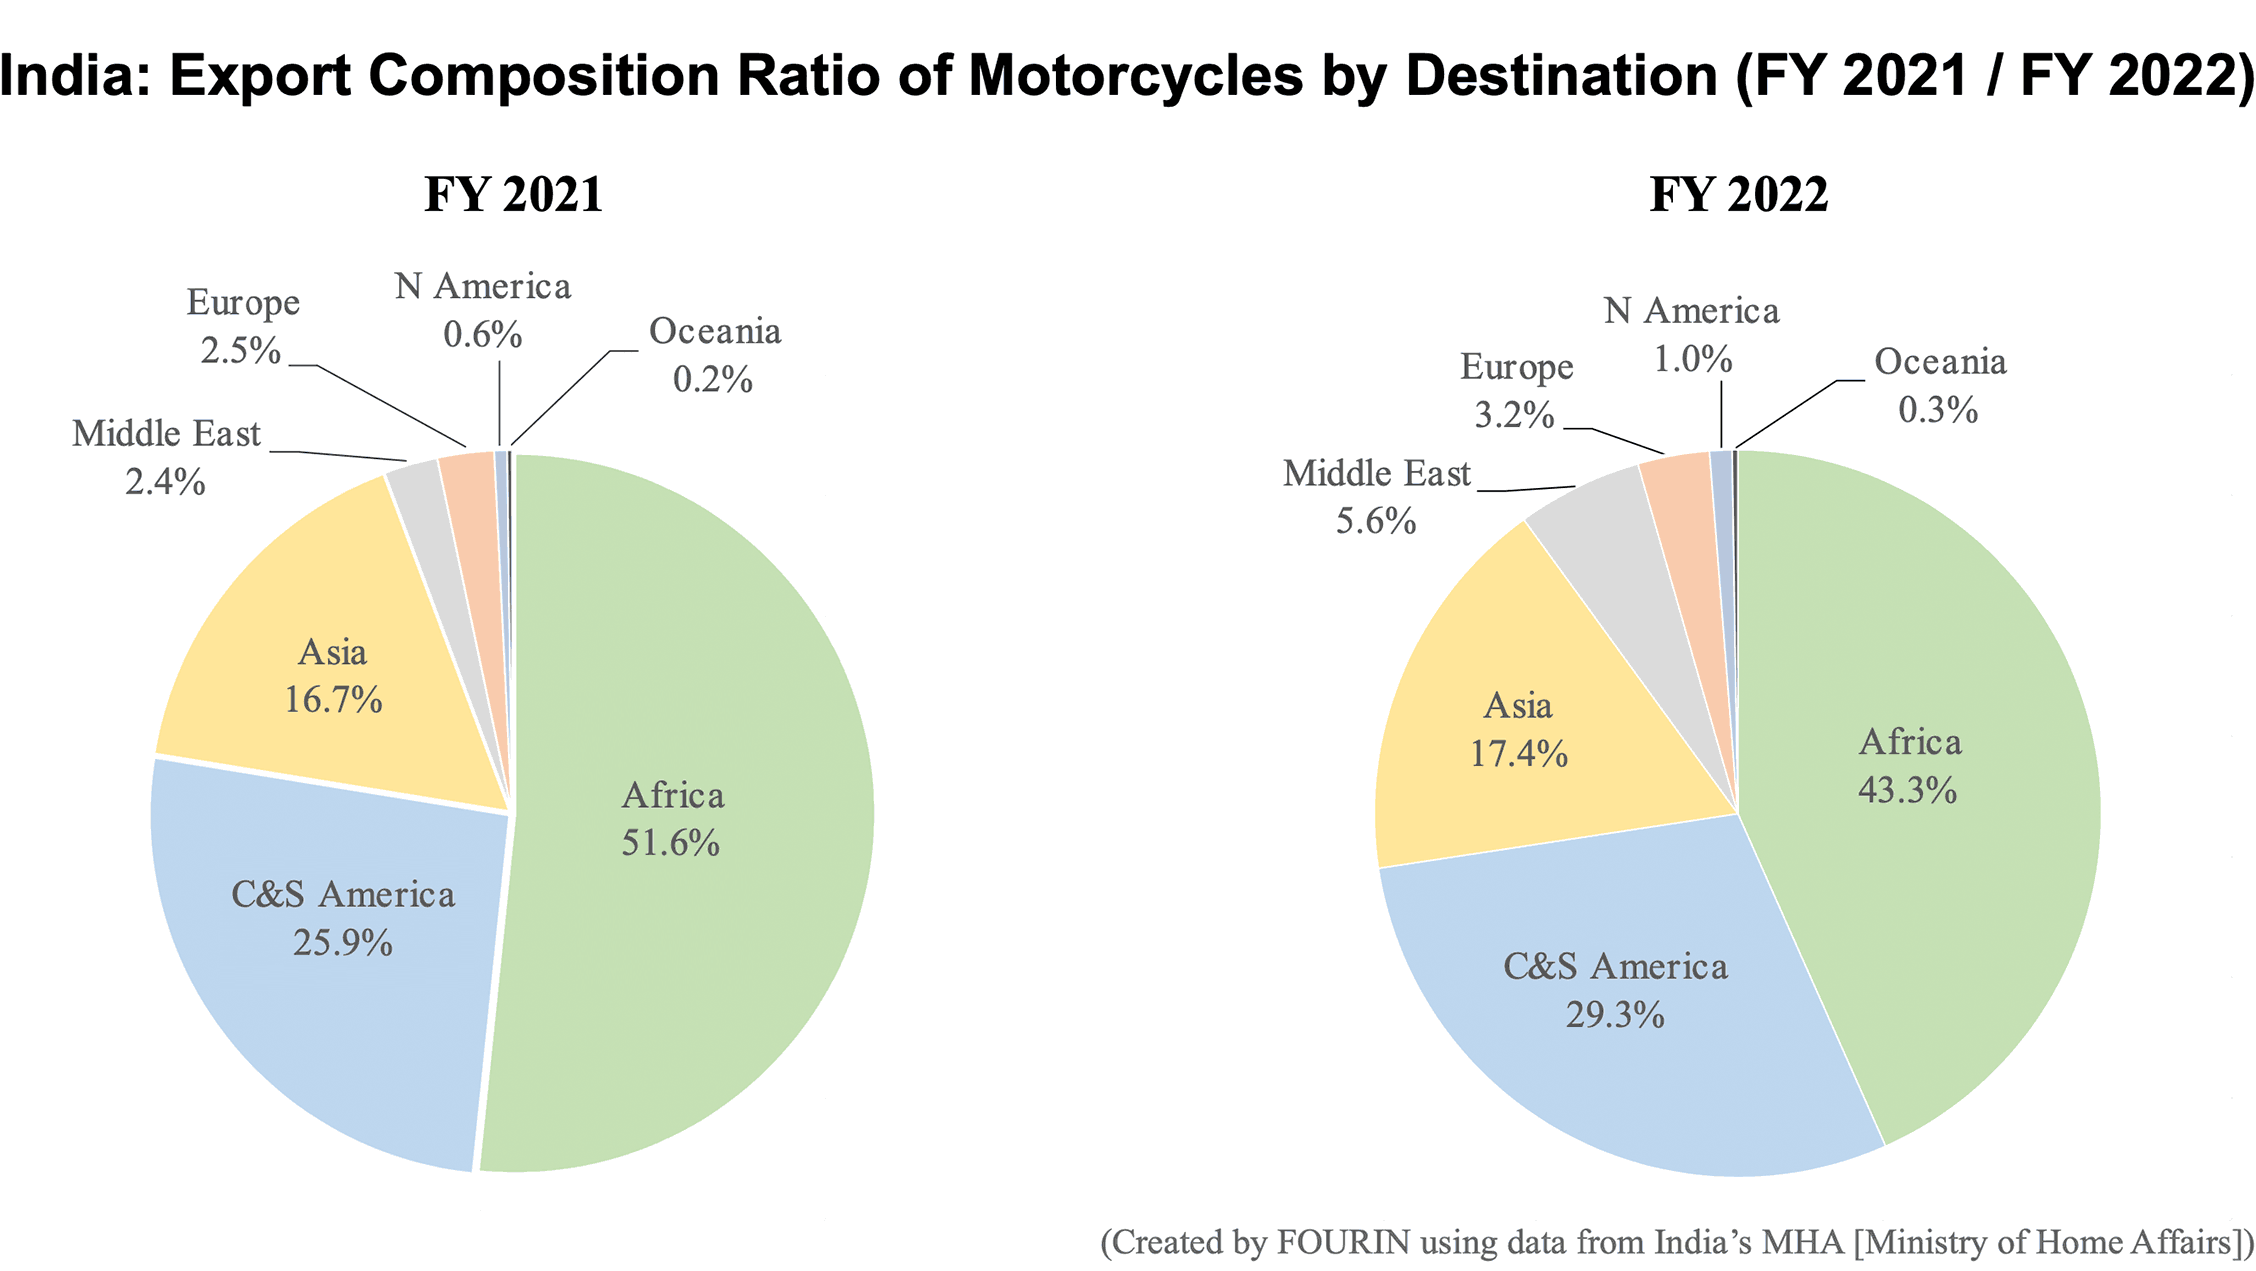 Pie charts: India: Export Composition Ratio of Motorcycles by Destination (FY 2021 / FY 2022)